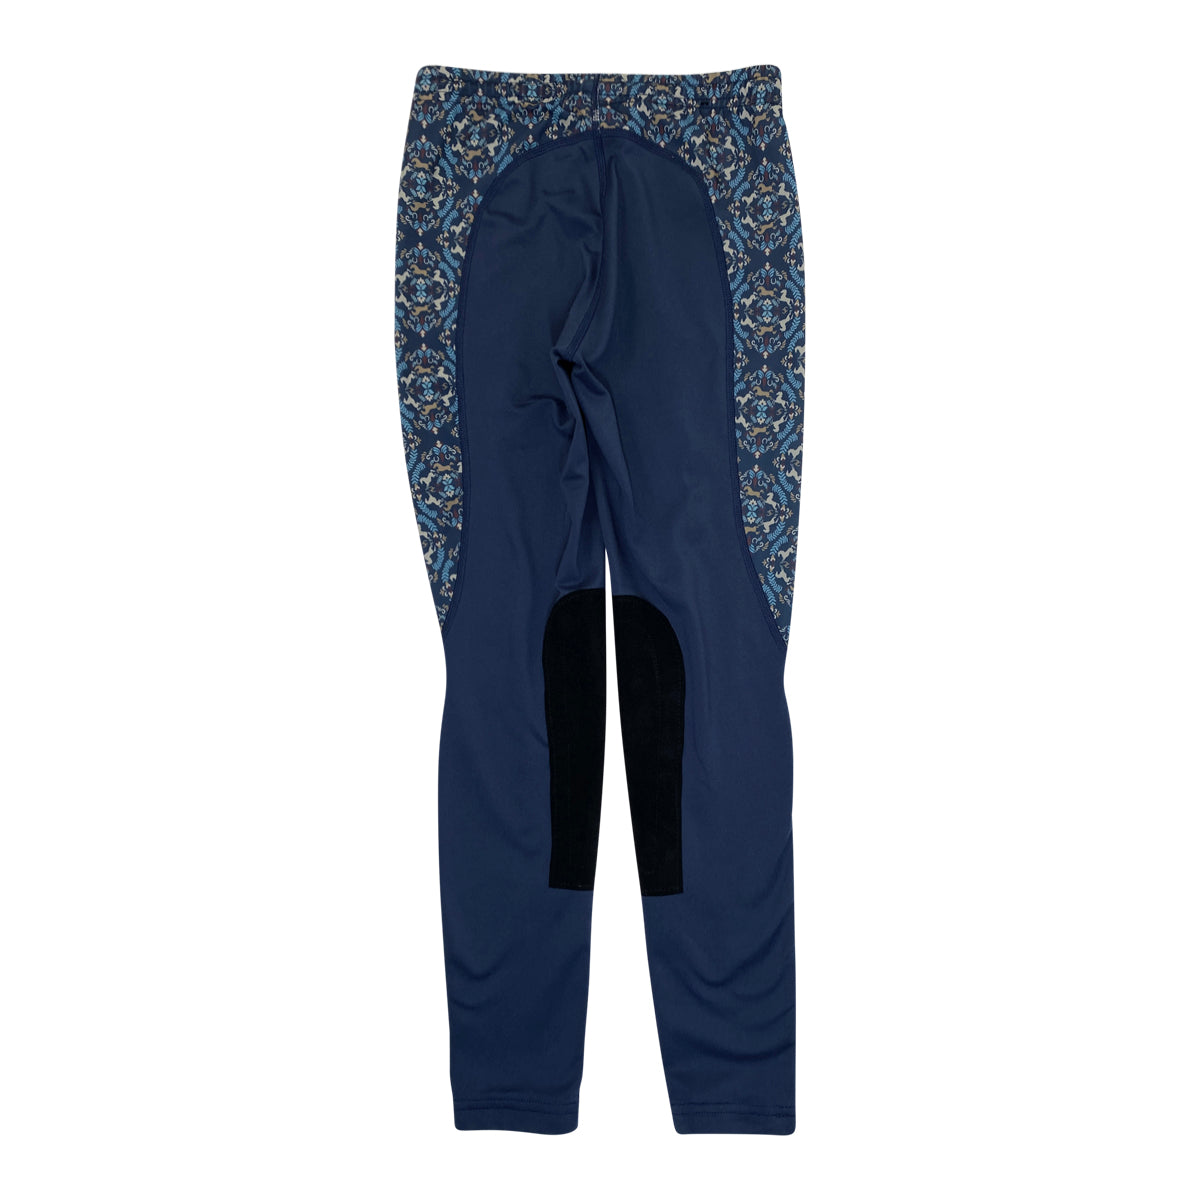 Kerrits Knee Patch Performance Tights in Navy w/ Floral Horse Pattern